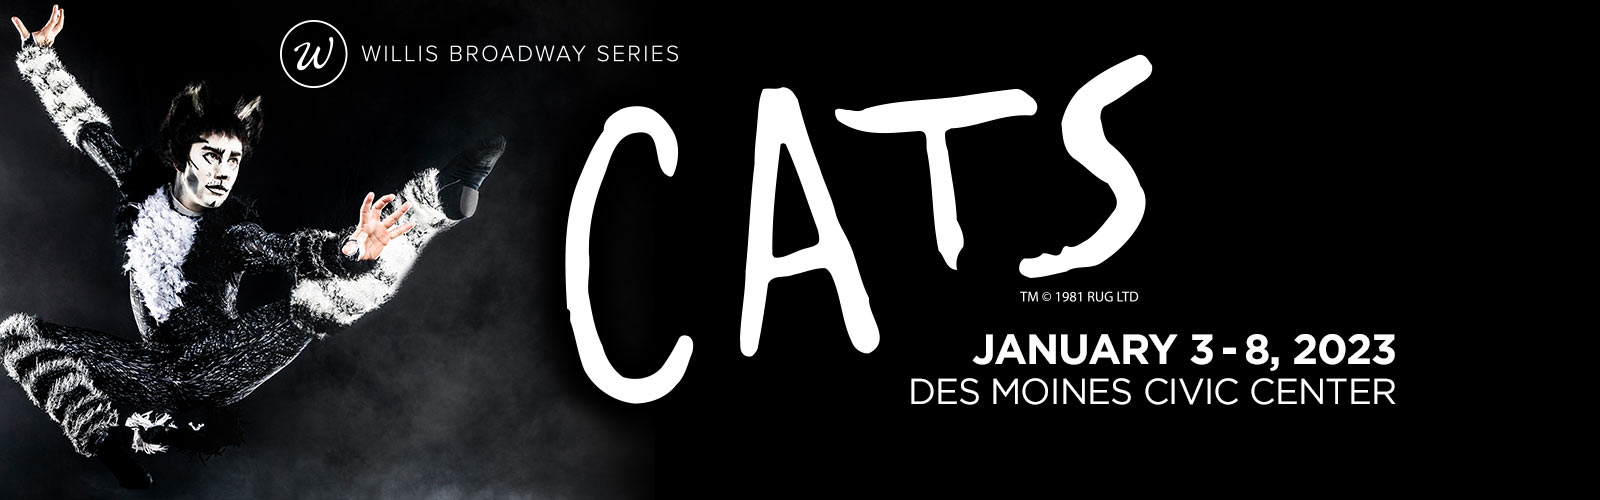 Cats the Musical at the Des Moines Civic Center Jan. 3-8, 2023